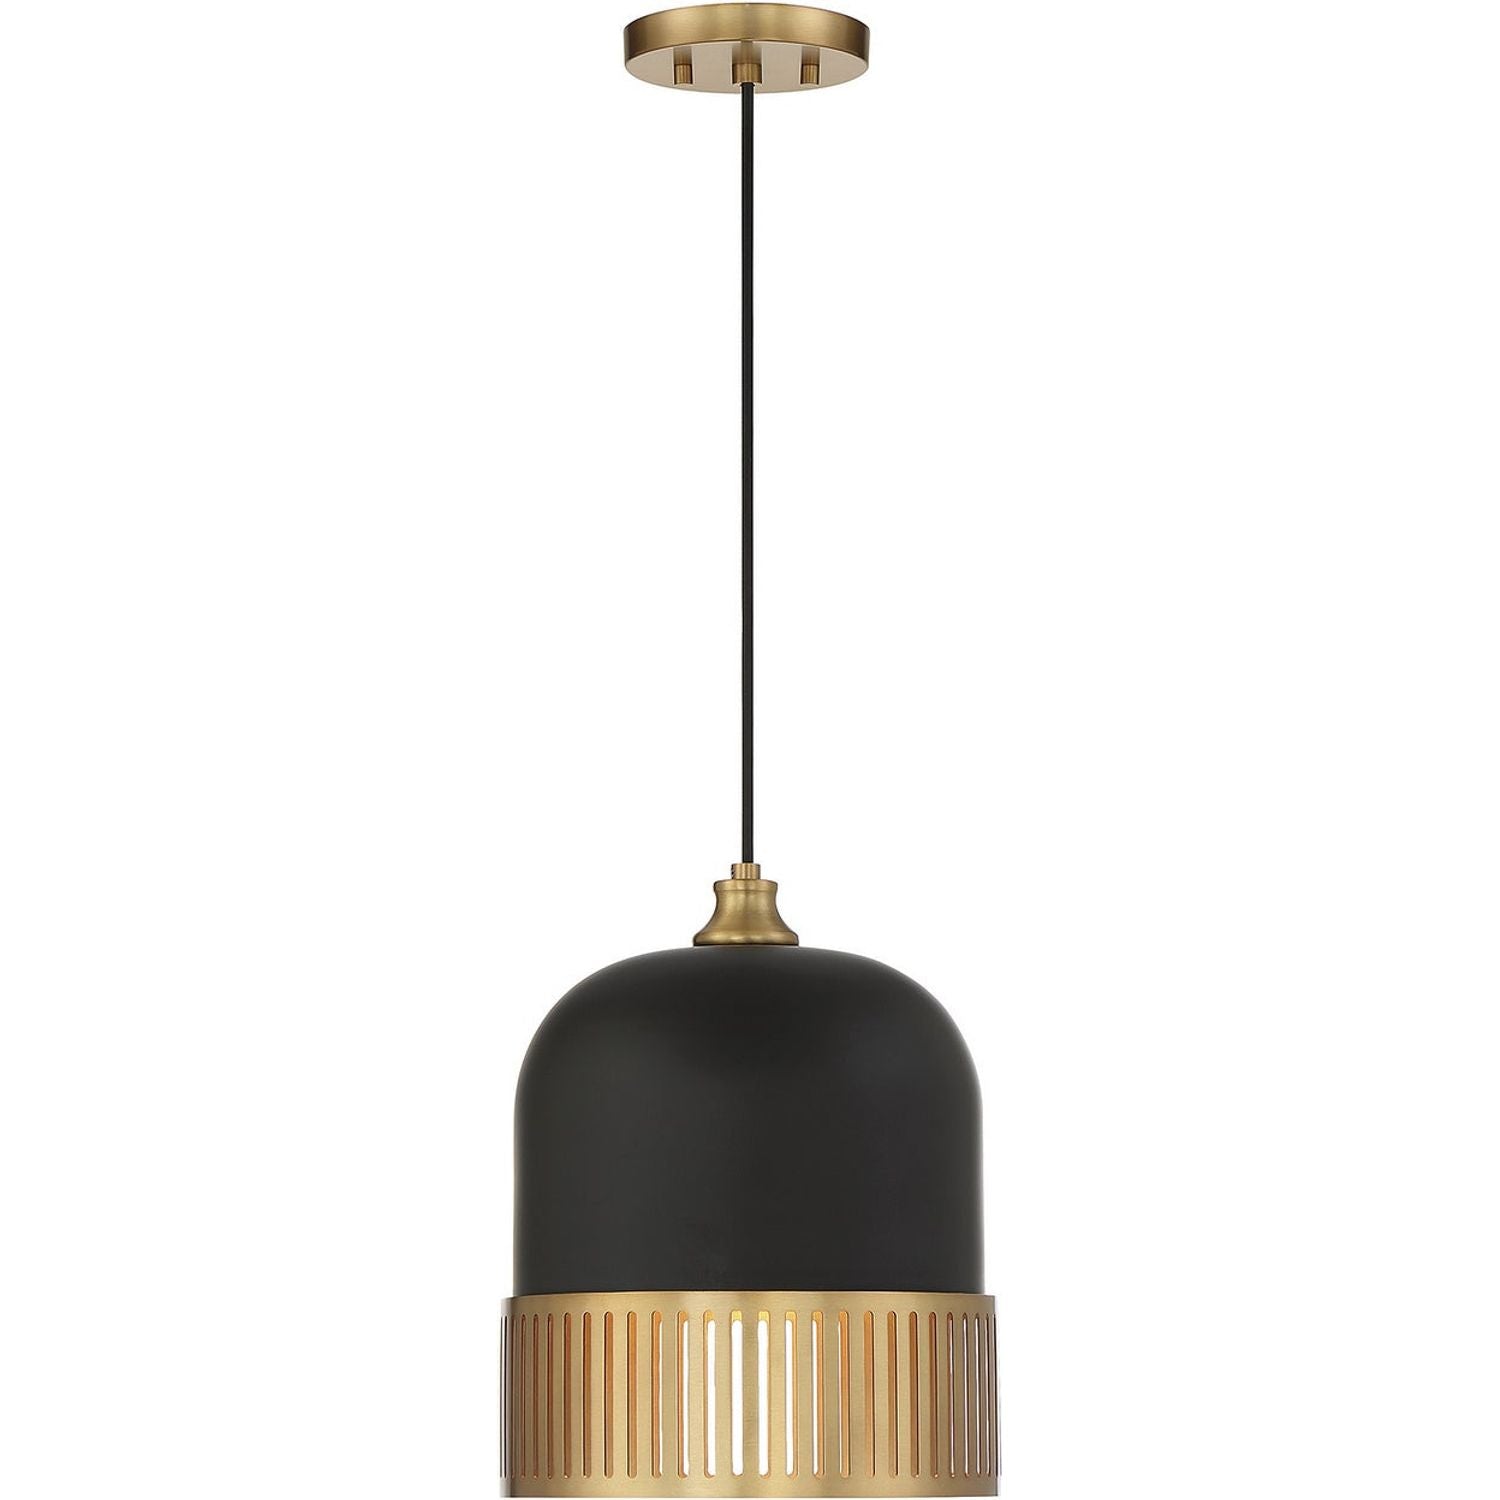 Savoy House - 7-1810-1-143 - One Light Pendant - Eclipse - Matte Black with Warm Brass Accents